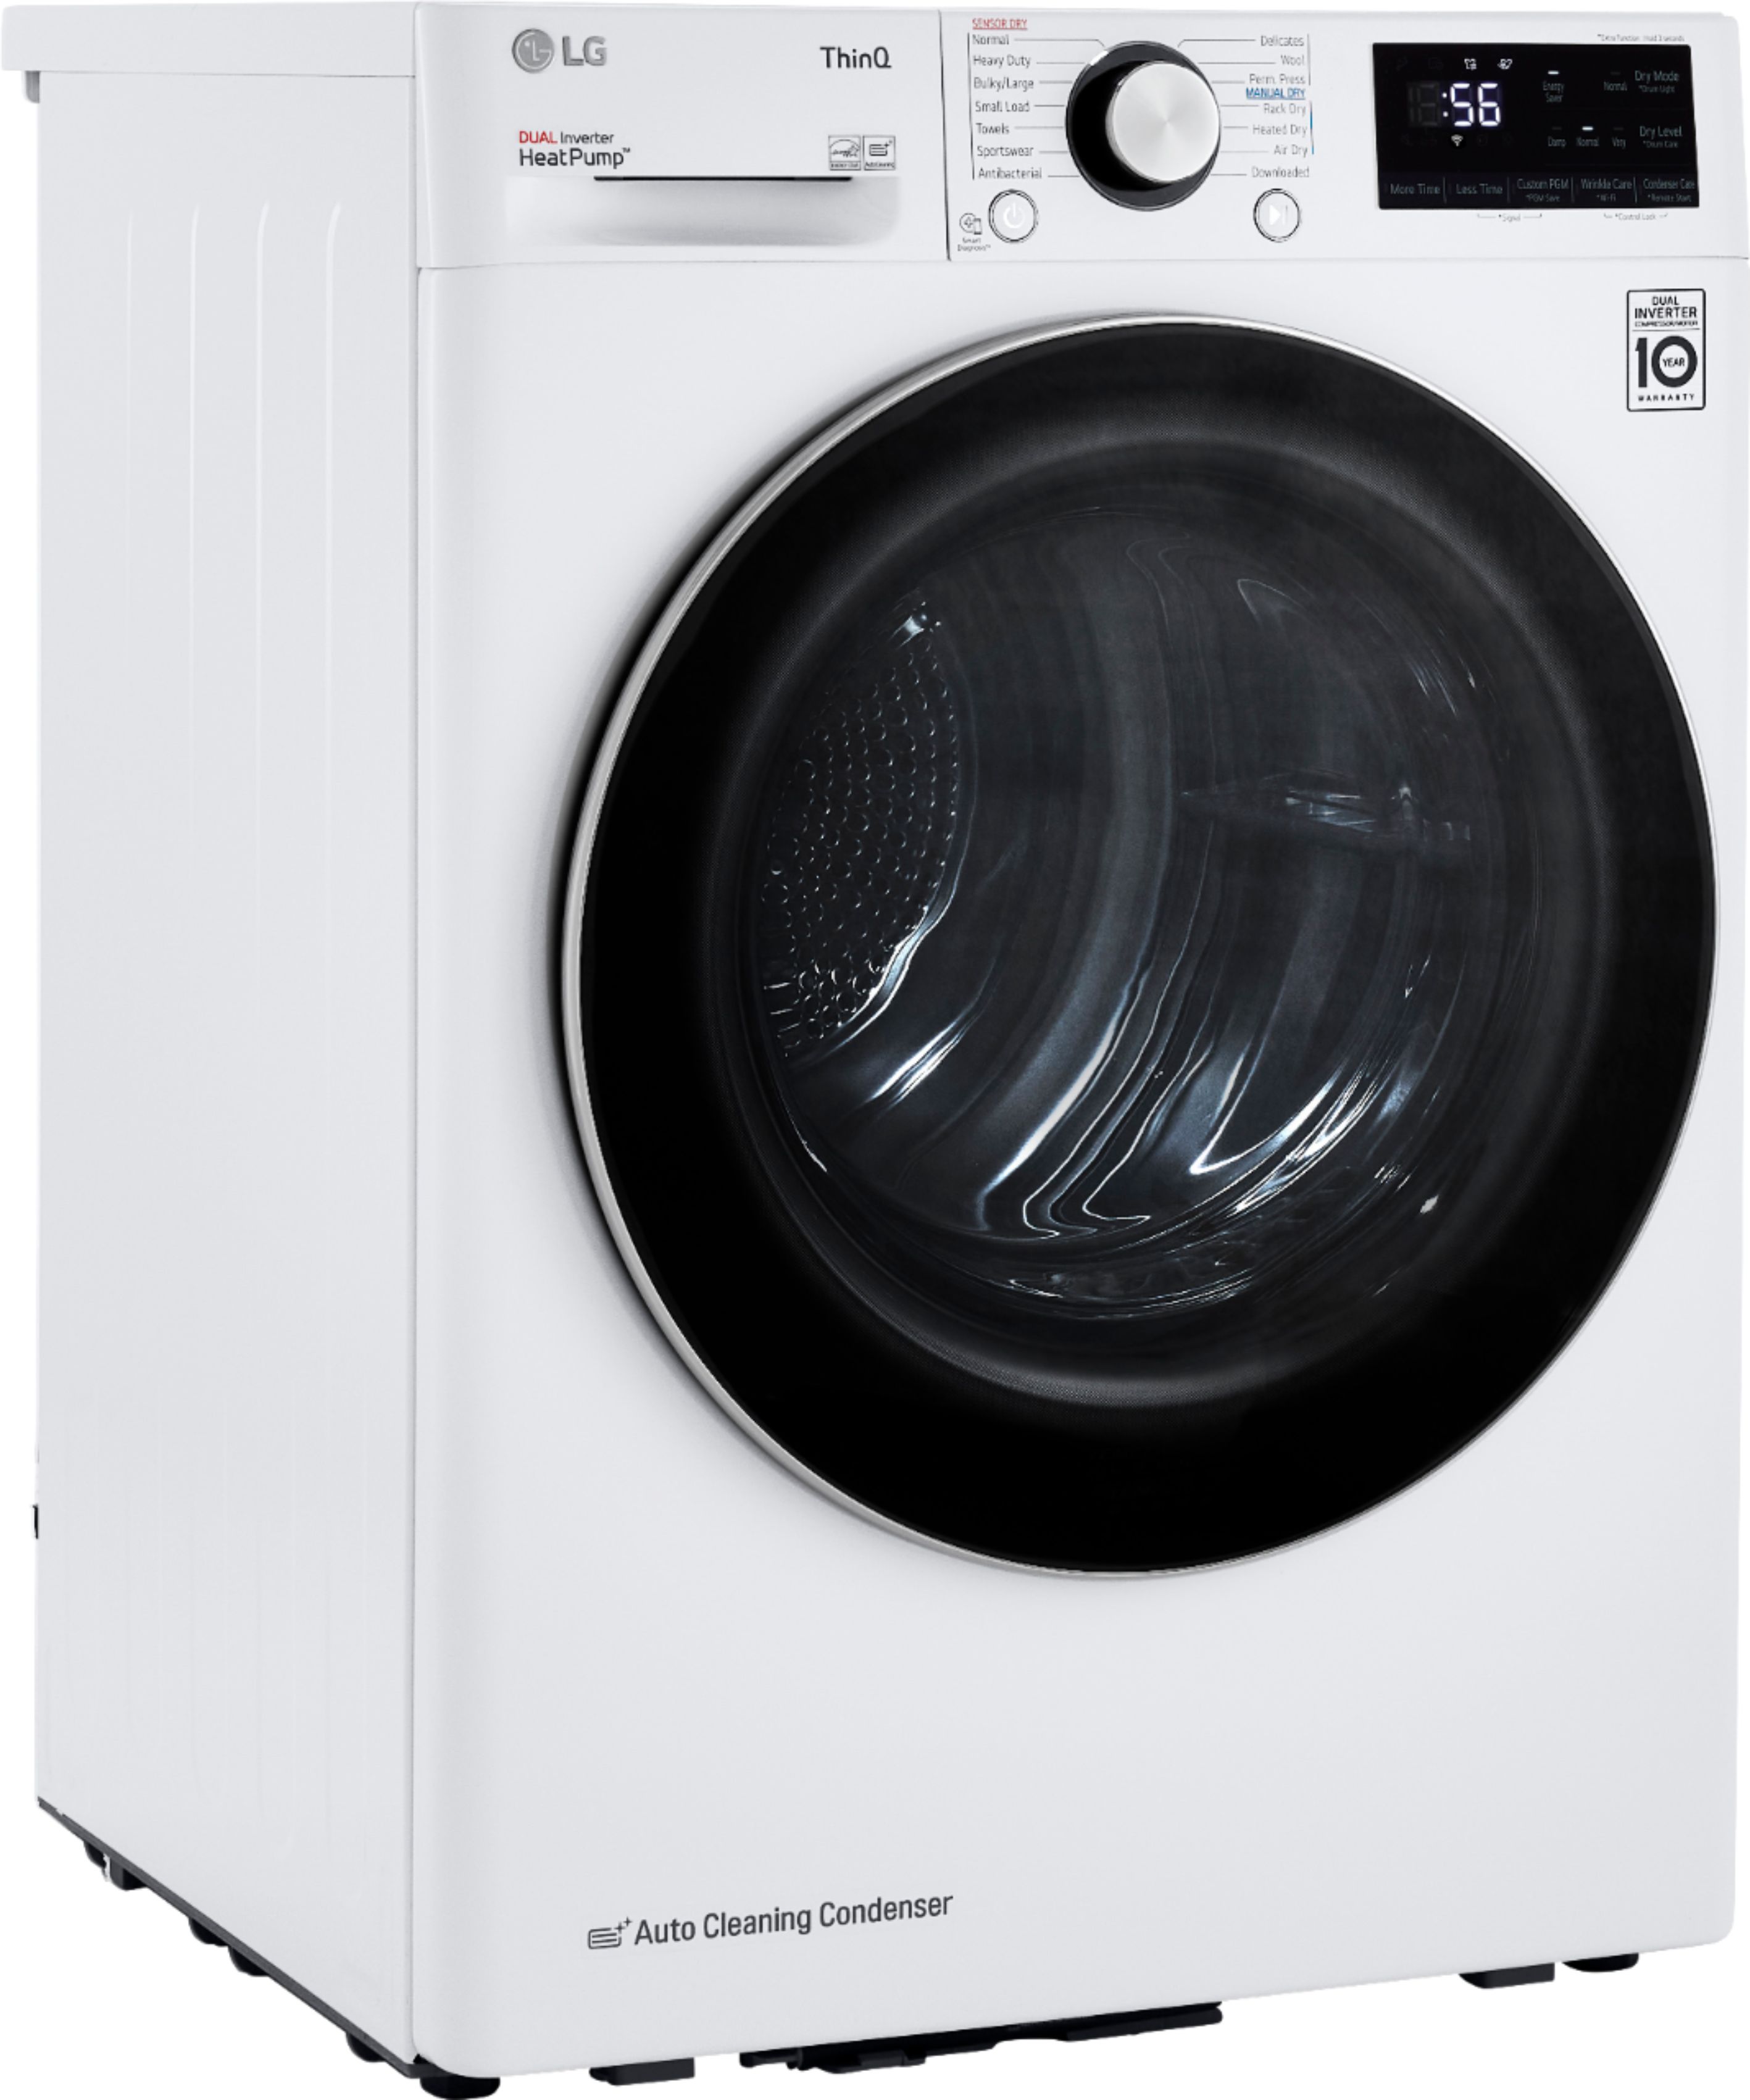 Angle View: LG - 4.2 cu ft Stackable Electric Dryer with Dual Inverter HeatPump - White